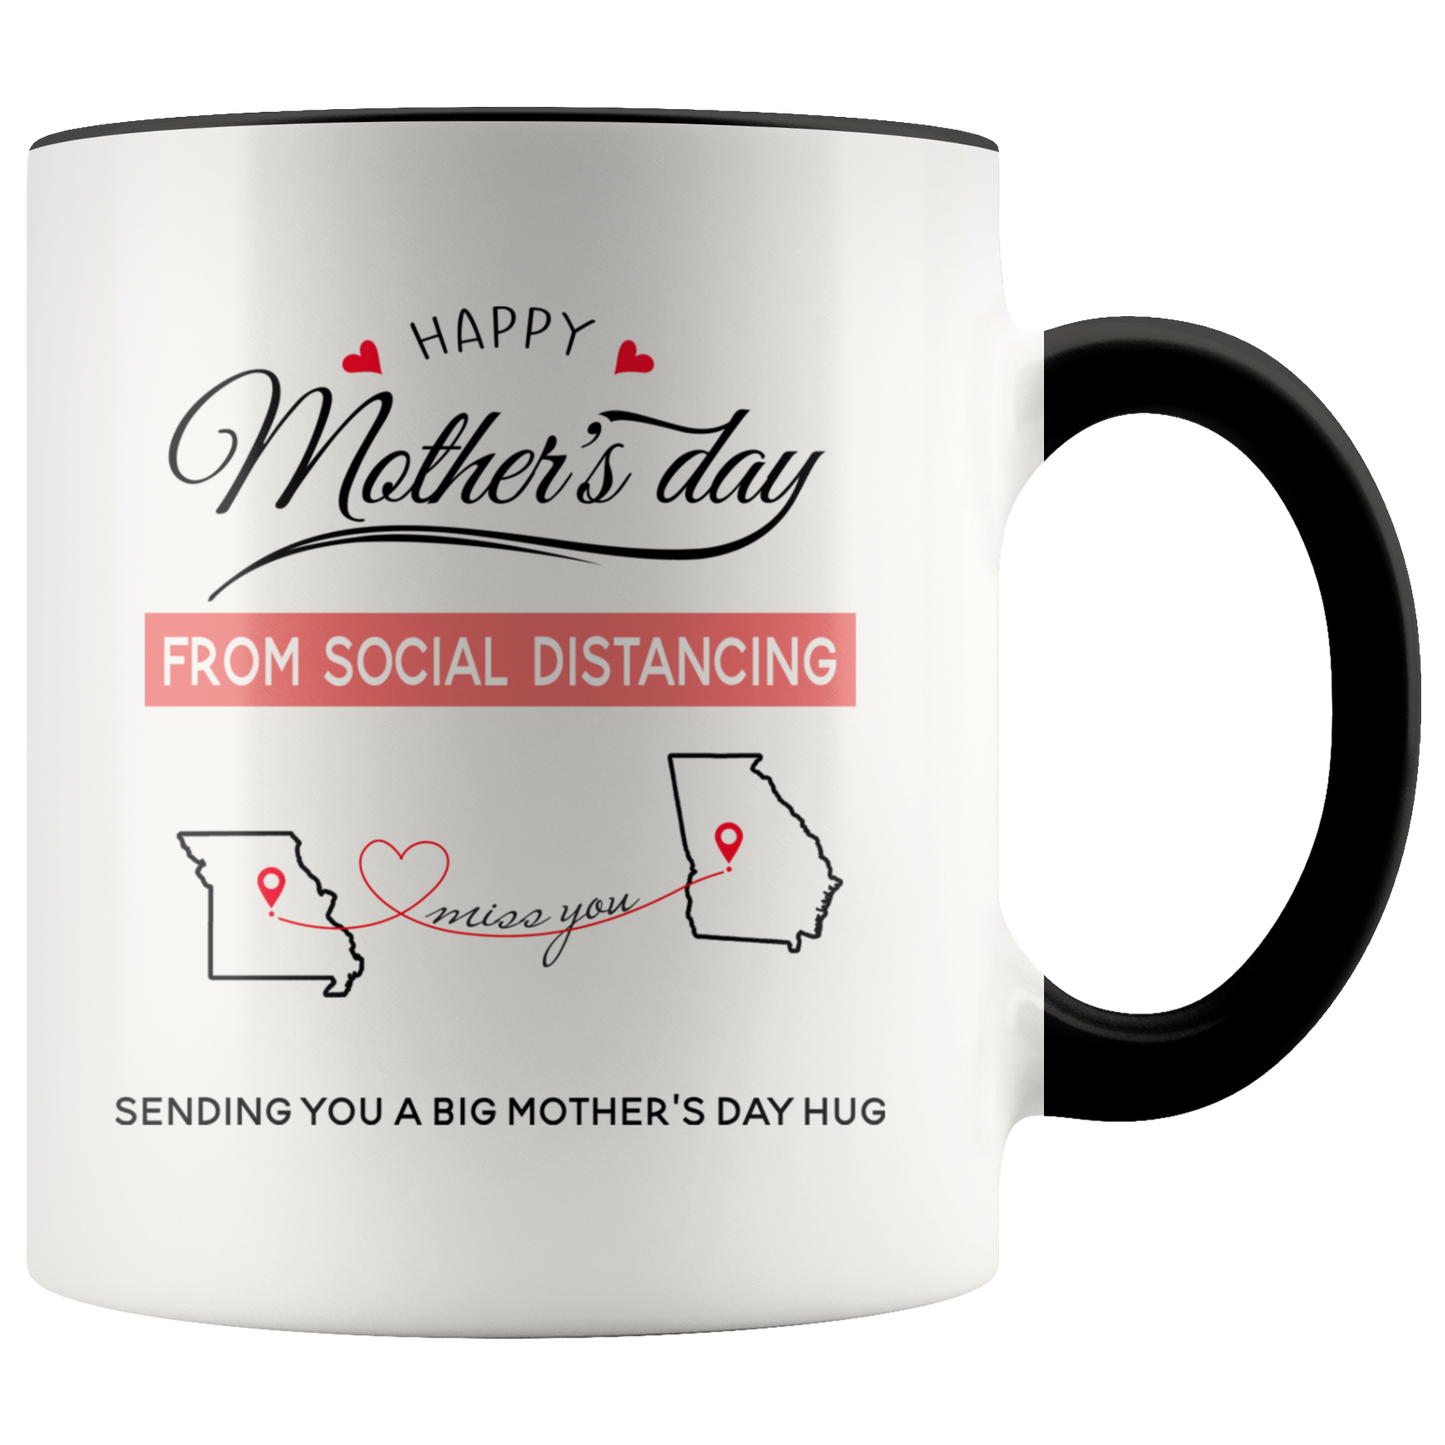 ND-21437118-sp-27690 - [ Missouri | Georgia ] (CC_Accent_Mug_) Happy Mothers Day From Social Distancing, Sending You A Big